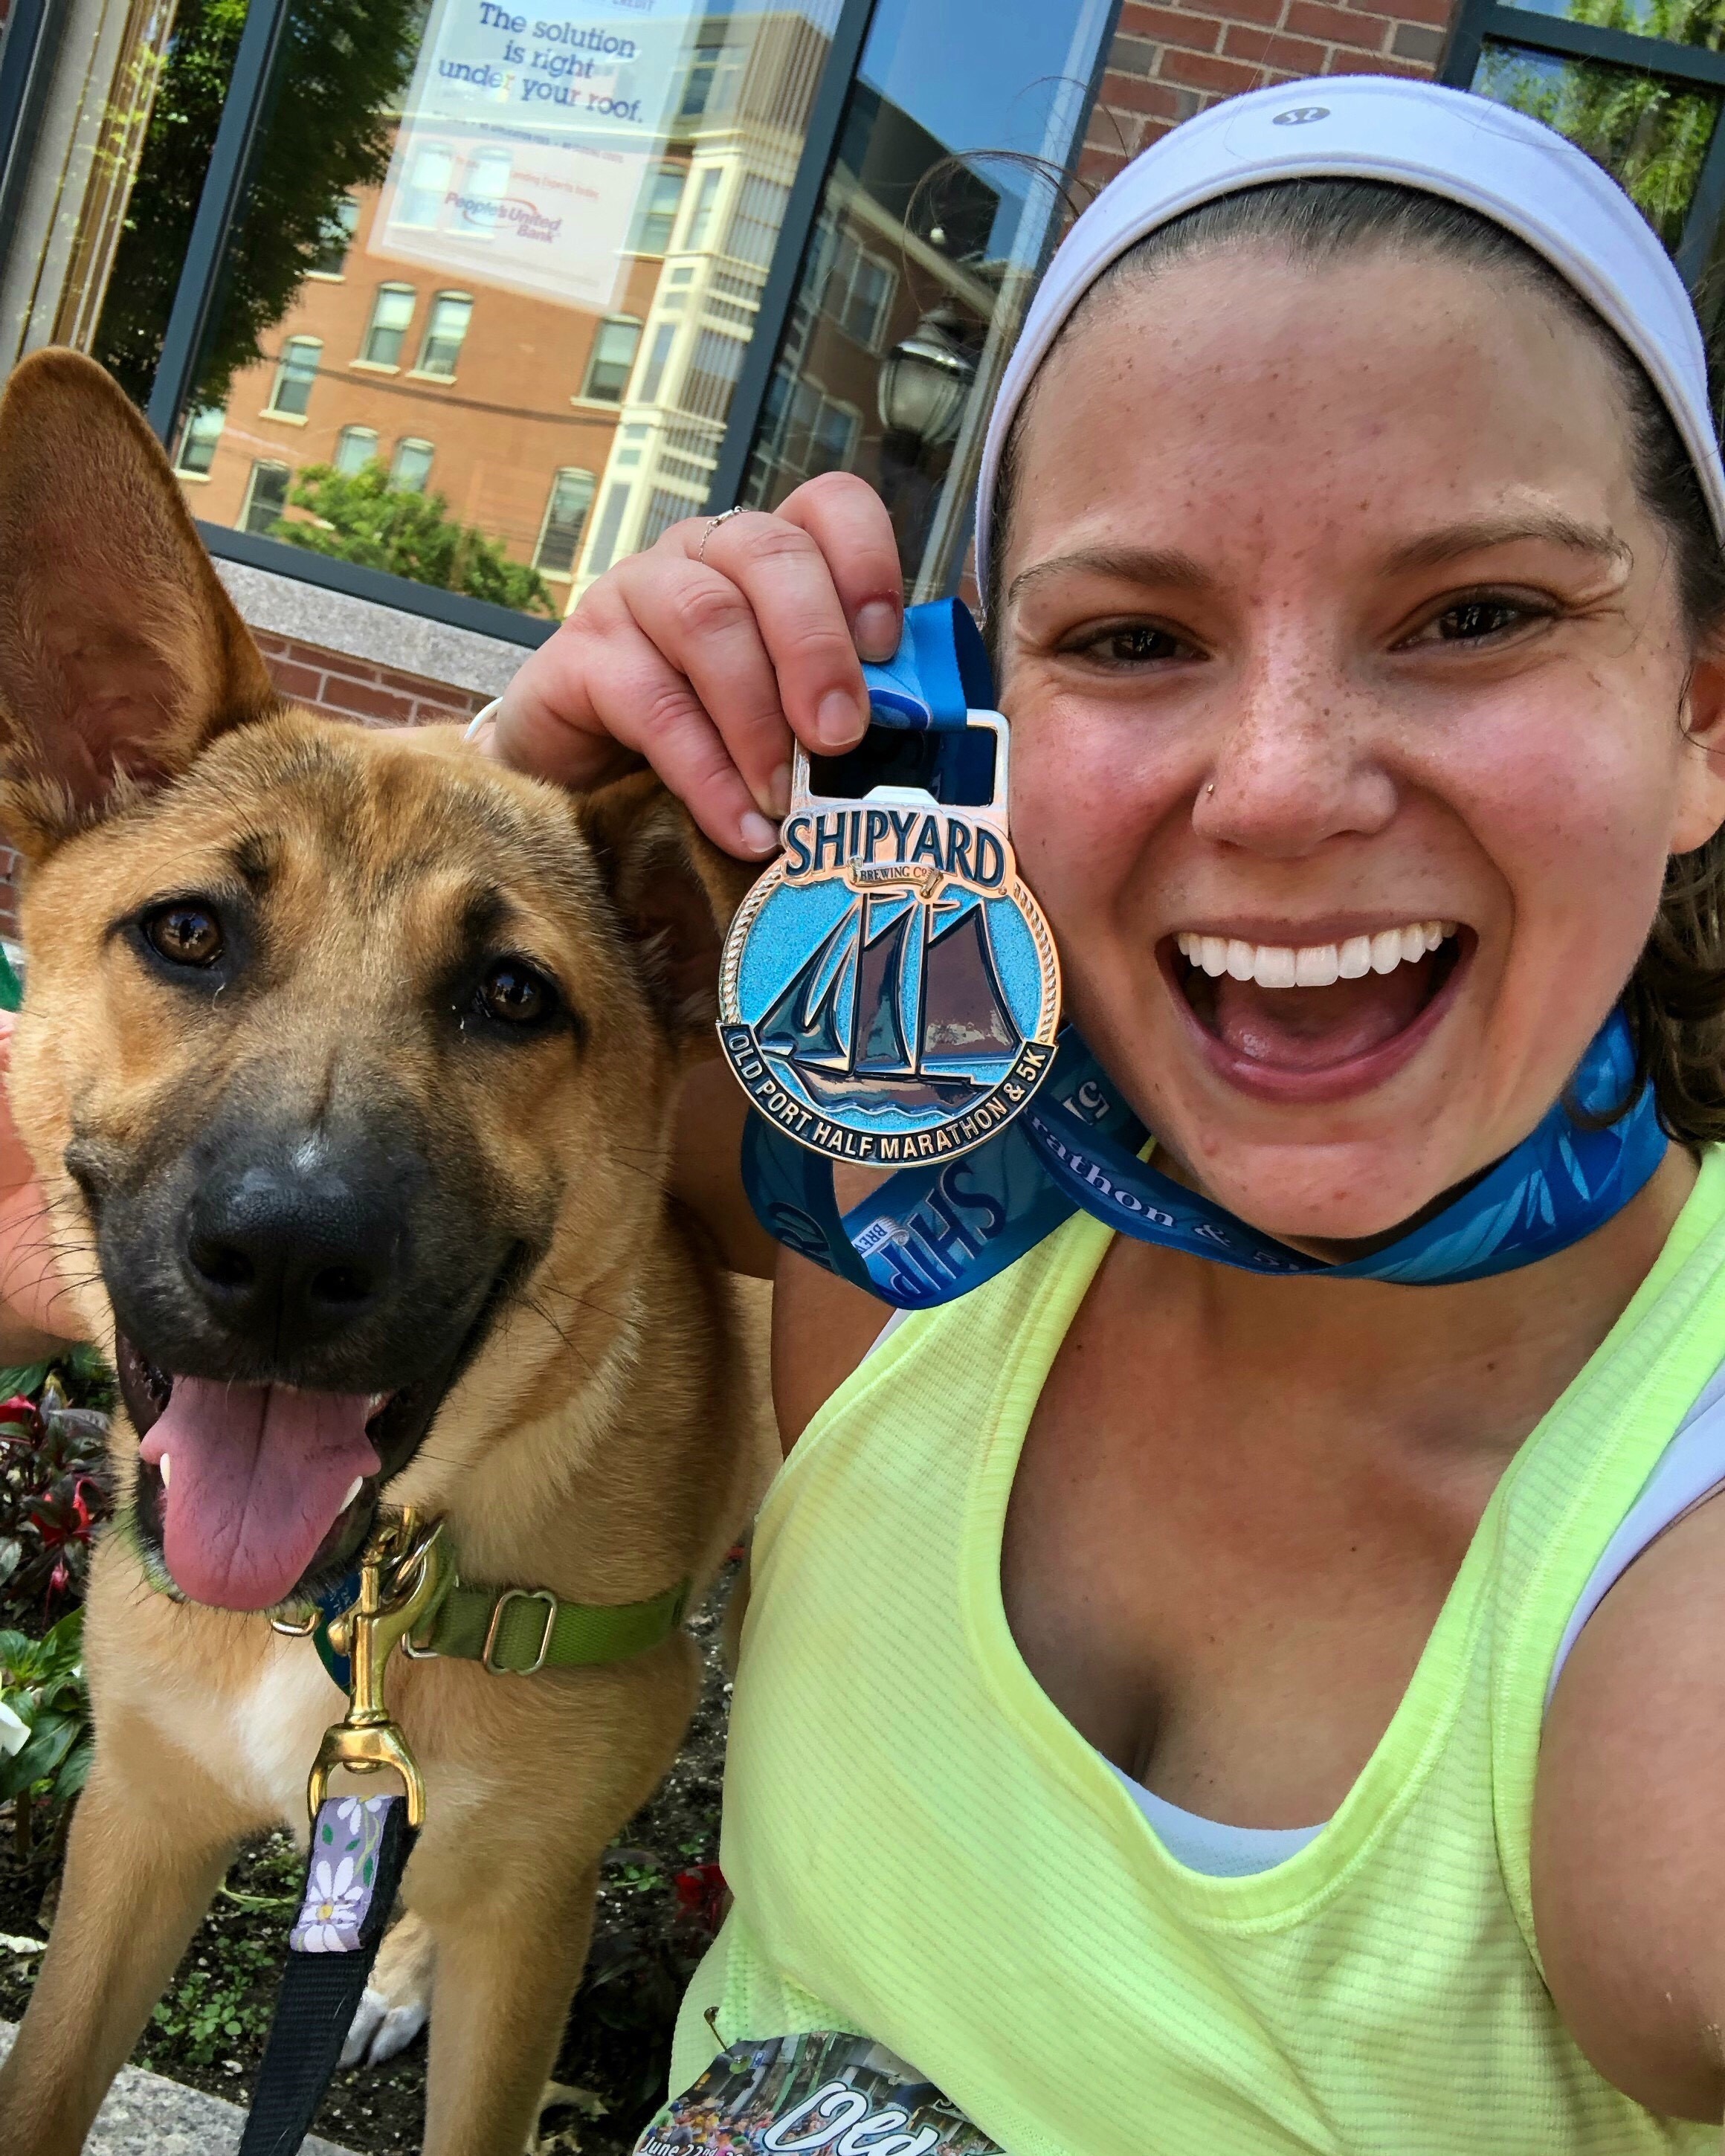 Angelica with her half-marathon medal and her puppy